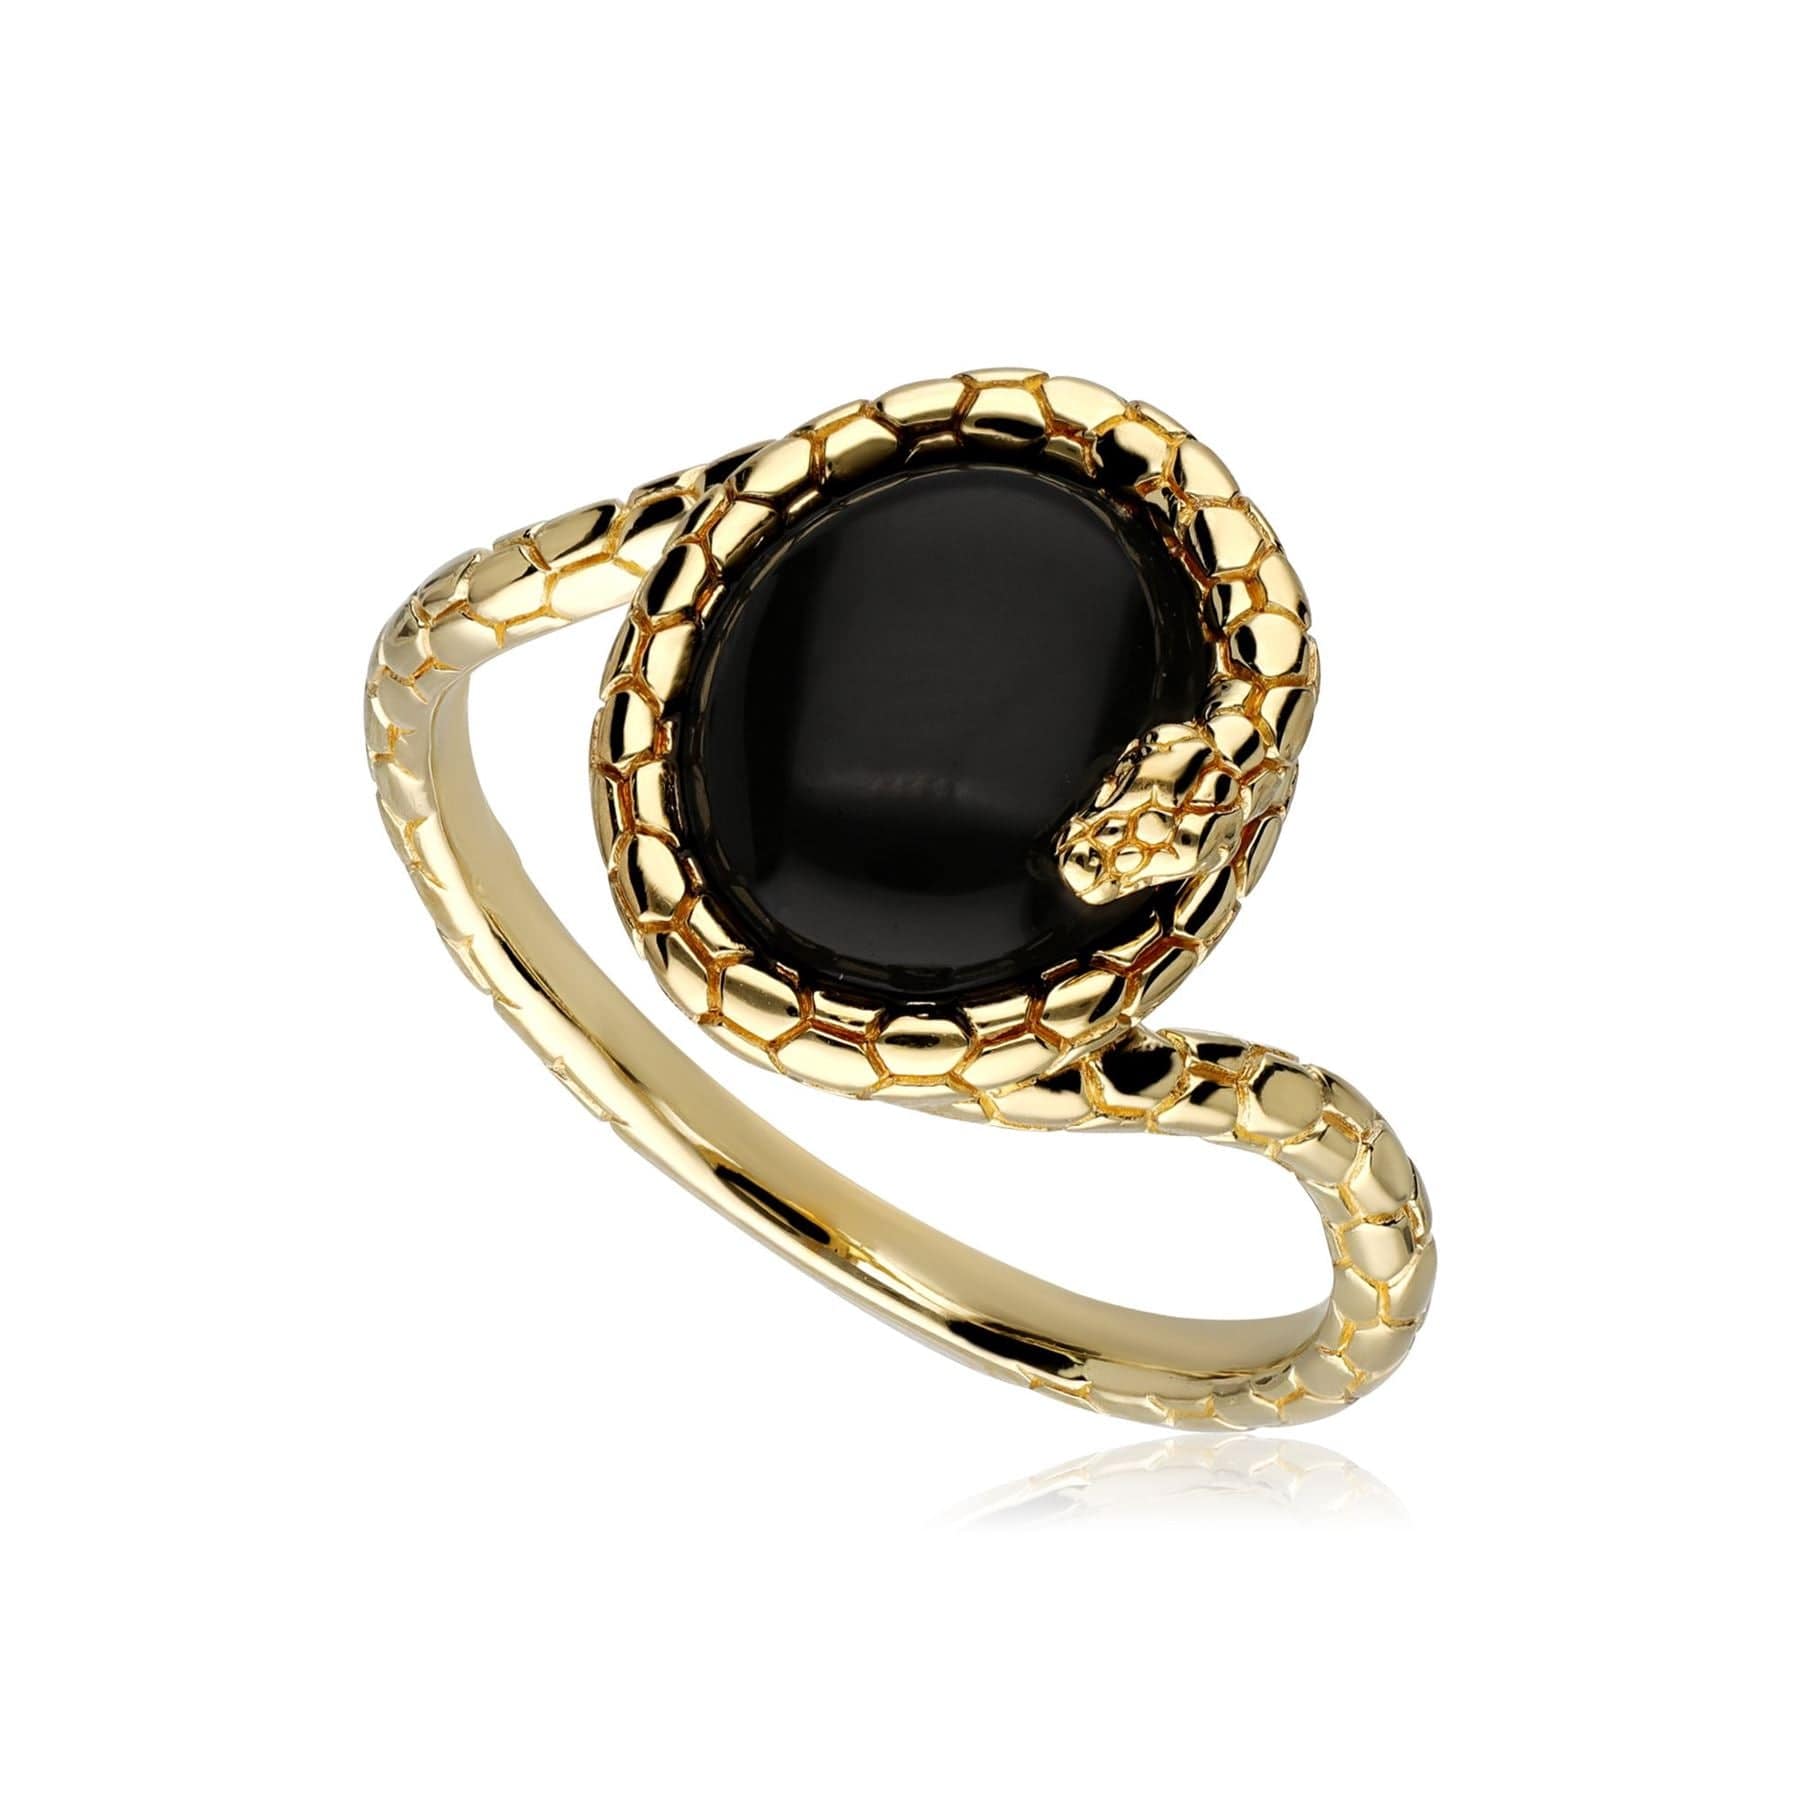 Buy Clearance! Hot Sale! Fashion Women Copper Rings Black Gemstone Jewelry  Wedding Rings Size 6-10 Engagement Gifts for Women,Gifts for Boyfriend  Under 5 Dollars Valentine's Day Gifts for Girlfriend Online at  desertcartINDIA